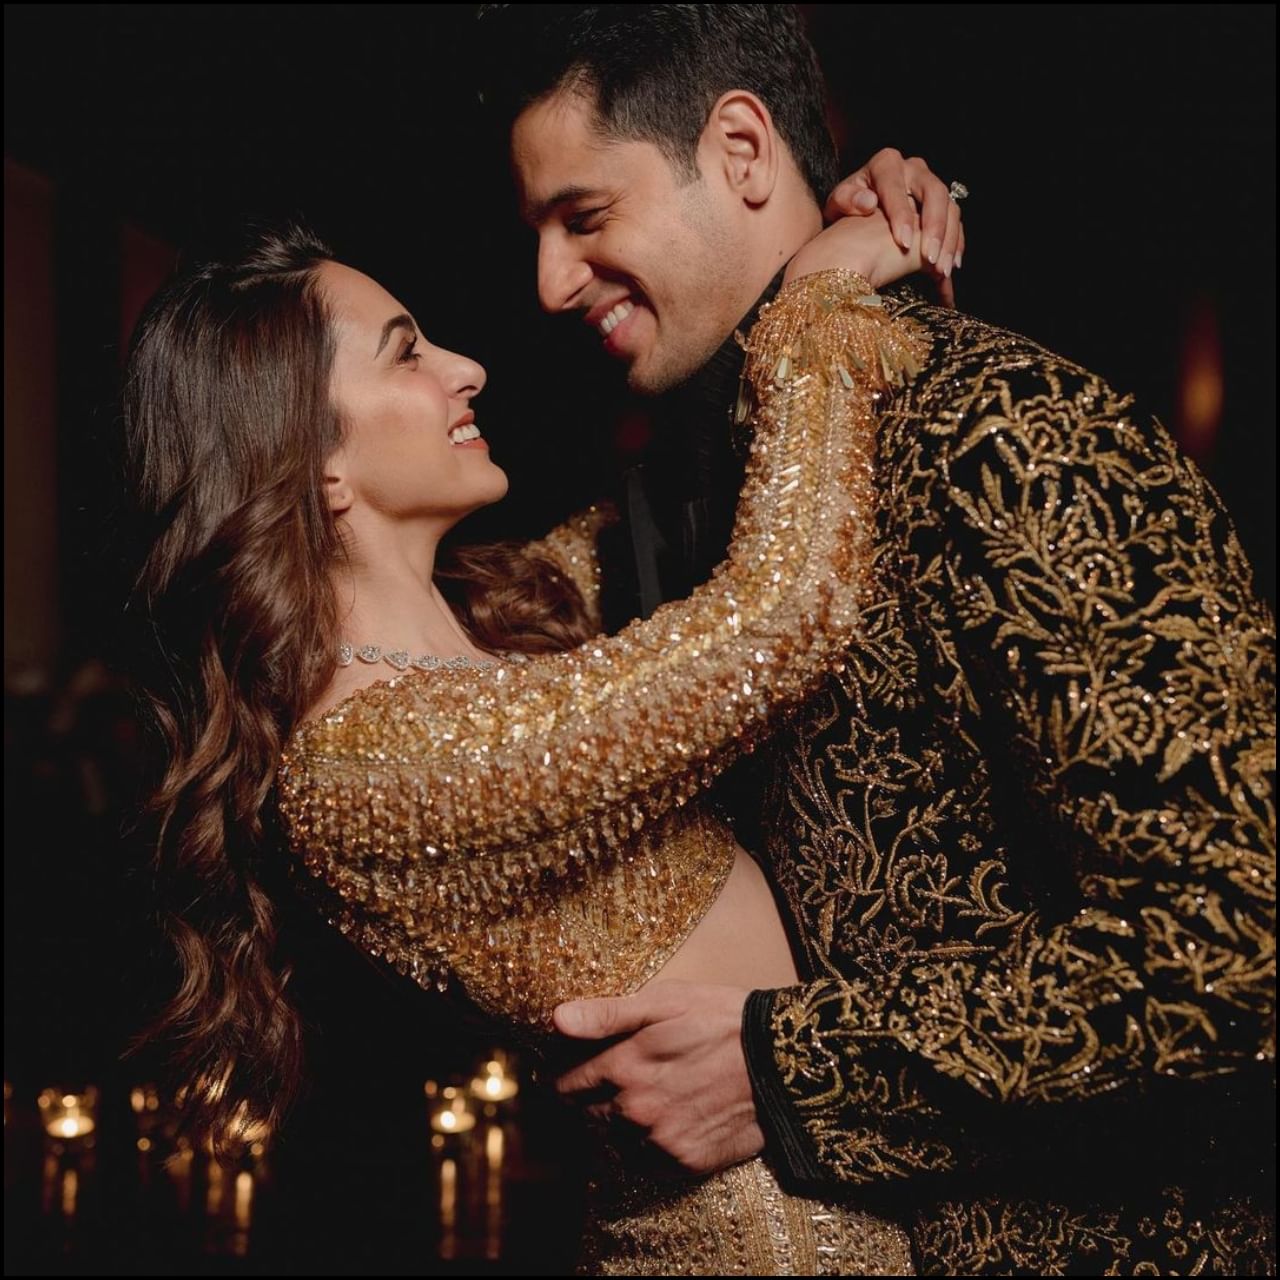 The sherwani of the groom Siddharth Malhotra is also very special. Fine thread work has been done in Siddharth's sherwani. The velvet sherwani is encrusted with precious Swarovski crystals giving it an absolutely royal look. 